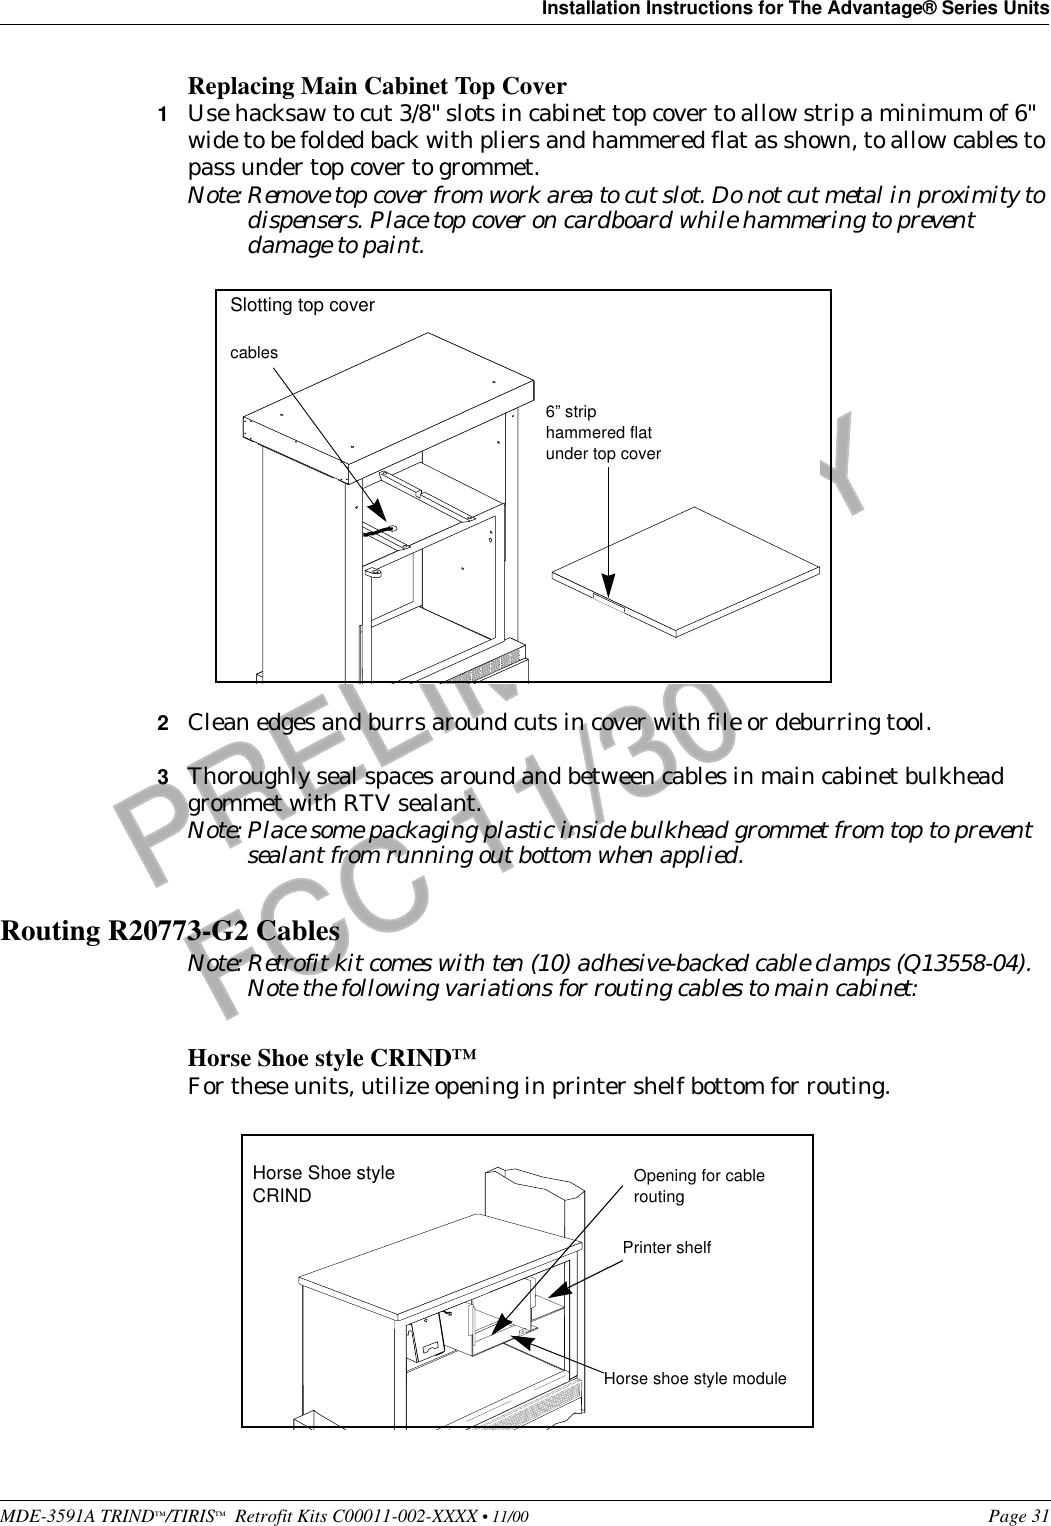 MDE-3591A TRIND™/TIRIS™  Retrofit Kits C00011-002-XXXX • 11/00 Page 31Installation Instructions for The Advantage® Series UnitsPRELIMINARYFCC 11/30Replacing Main Cabinet Top Cover1Use hacksaw to cut 3/8&quot; slots in cabinet top cover to allow strip a minimum of 6&quot; wide to be folded back with pliers and hammered flat as shown, to allow cables to pass under top cover to grommet. Note: Remove top cover from work area to cut slot. Do not cut metal in proximity to dispensers. Place top cover on cardboard while hammering to prevent damage to paint.2Clean edges and burrs around cuts in cover with file or deburring tool. 3Thoroughly seal spaces around and between cables in main cabinet bulkhead grommet with RTV sealant.Note: Place some packaging plastic inside bulkhead grommet from top to prevent sealant from running out bottom when applied.Routing R20773-G2 CablesNote: Retrofit kit comes with ten (10) adhesive-backed cable clamps (Q13558-04). Note the following variations for routing cables to main cabinet:Horse Shoe style CRIND™For these units, utilize opening in printer shelf bottom for routing.6” strip hammered flat under top covercablesSlotting top coverHorse Shoe style CRINDPrinter shelfHorse shoe style moduleOpening for cable routing